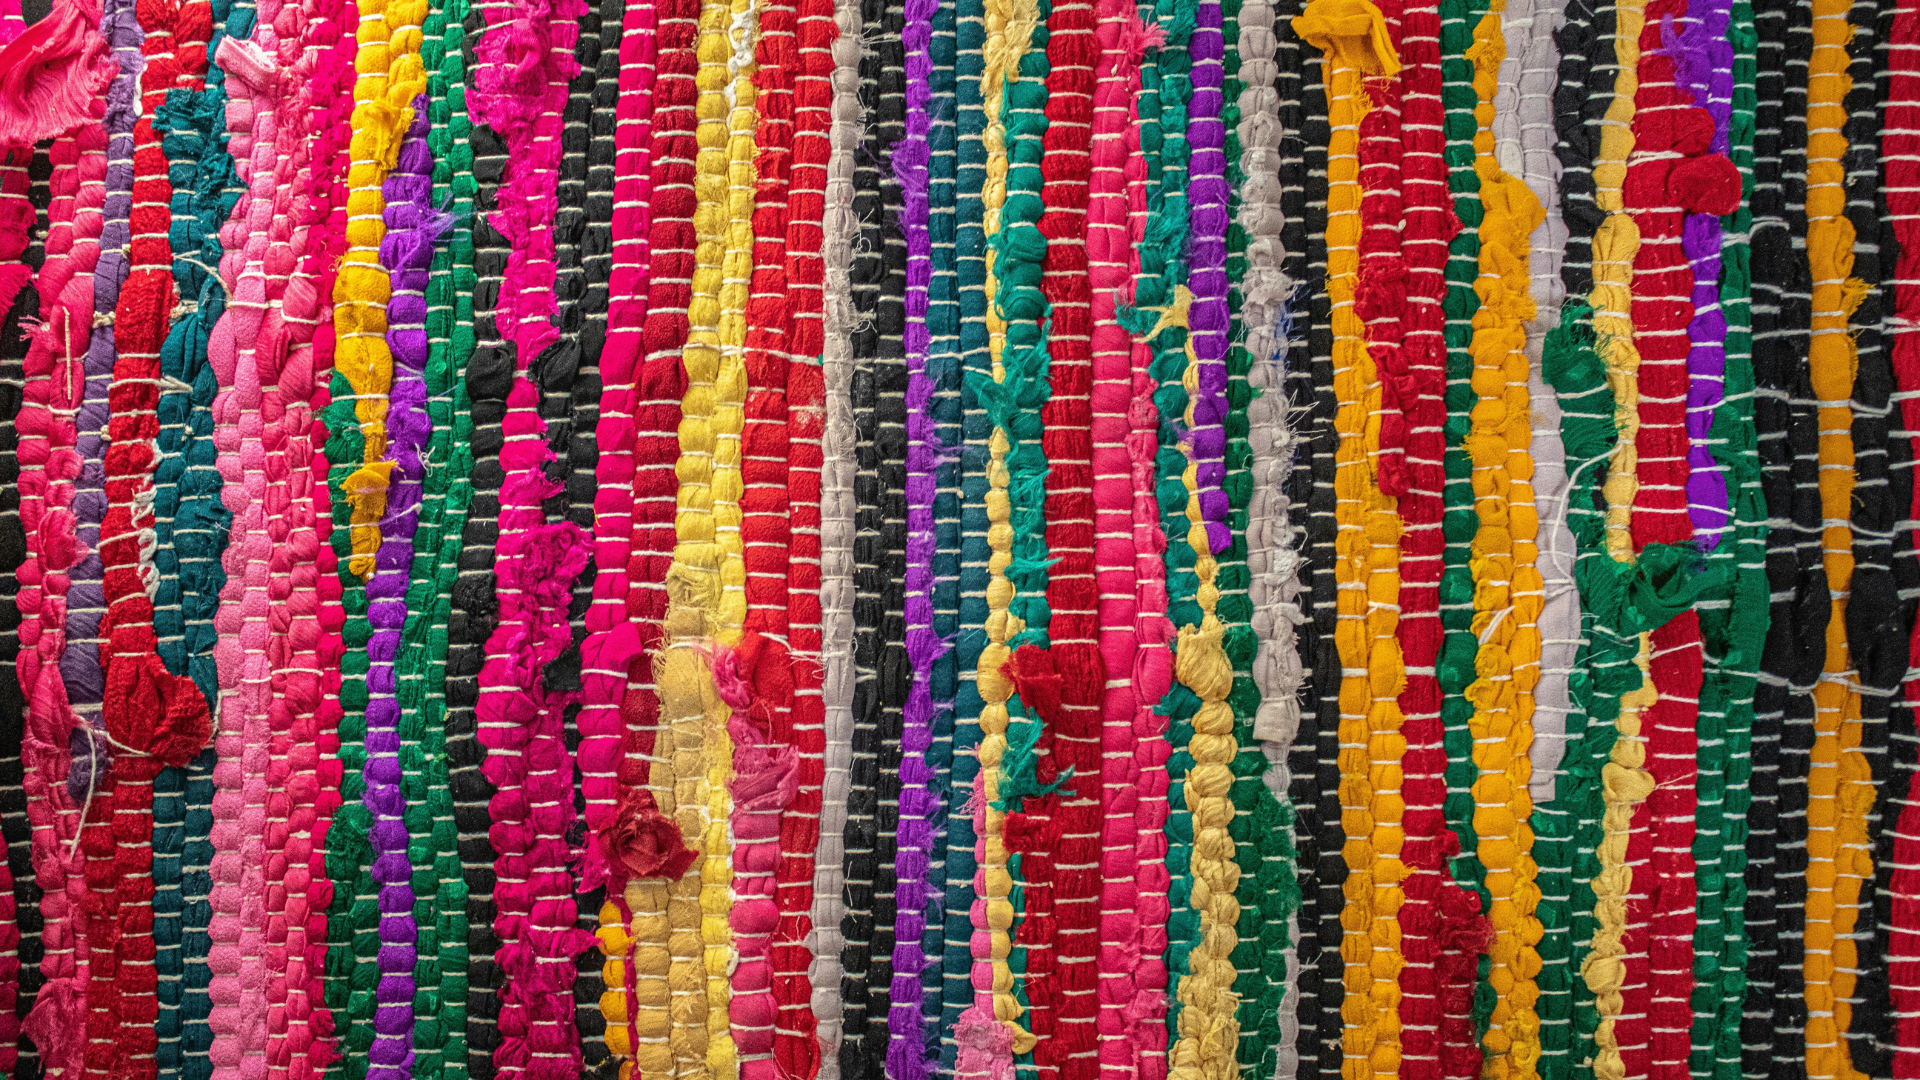 close up photo of a handwoven rug made of different strands or colored yarn